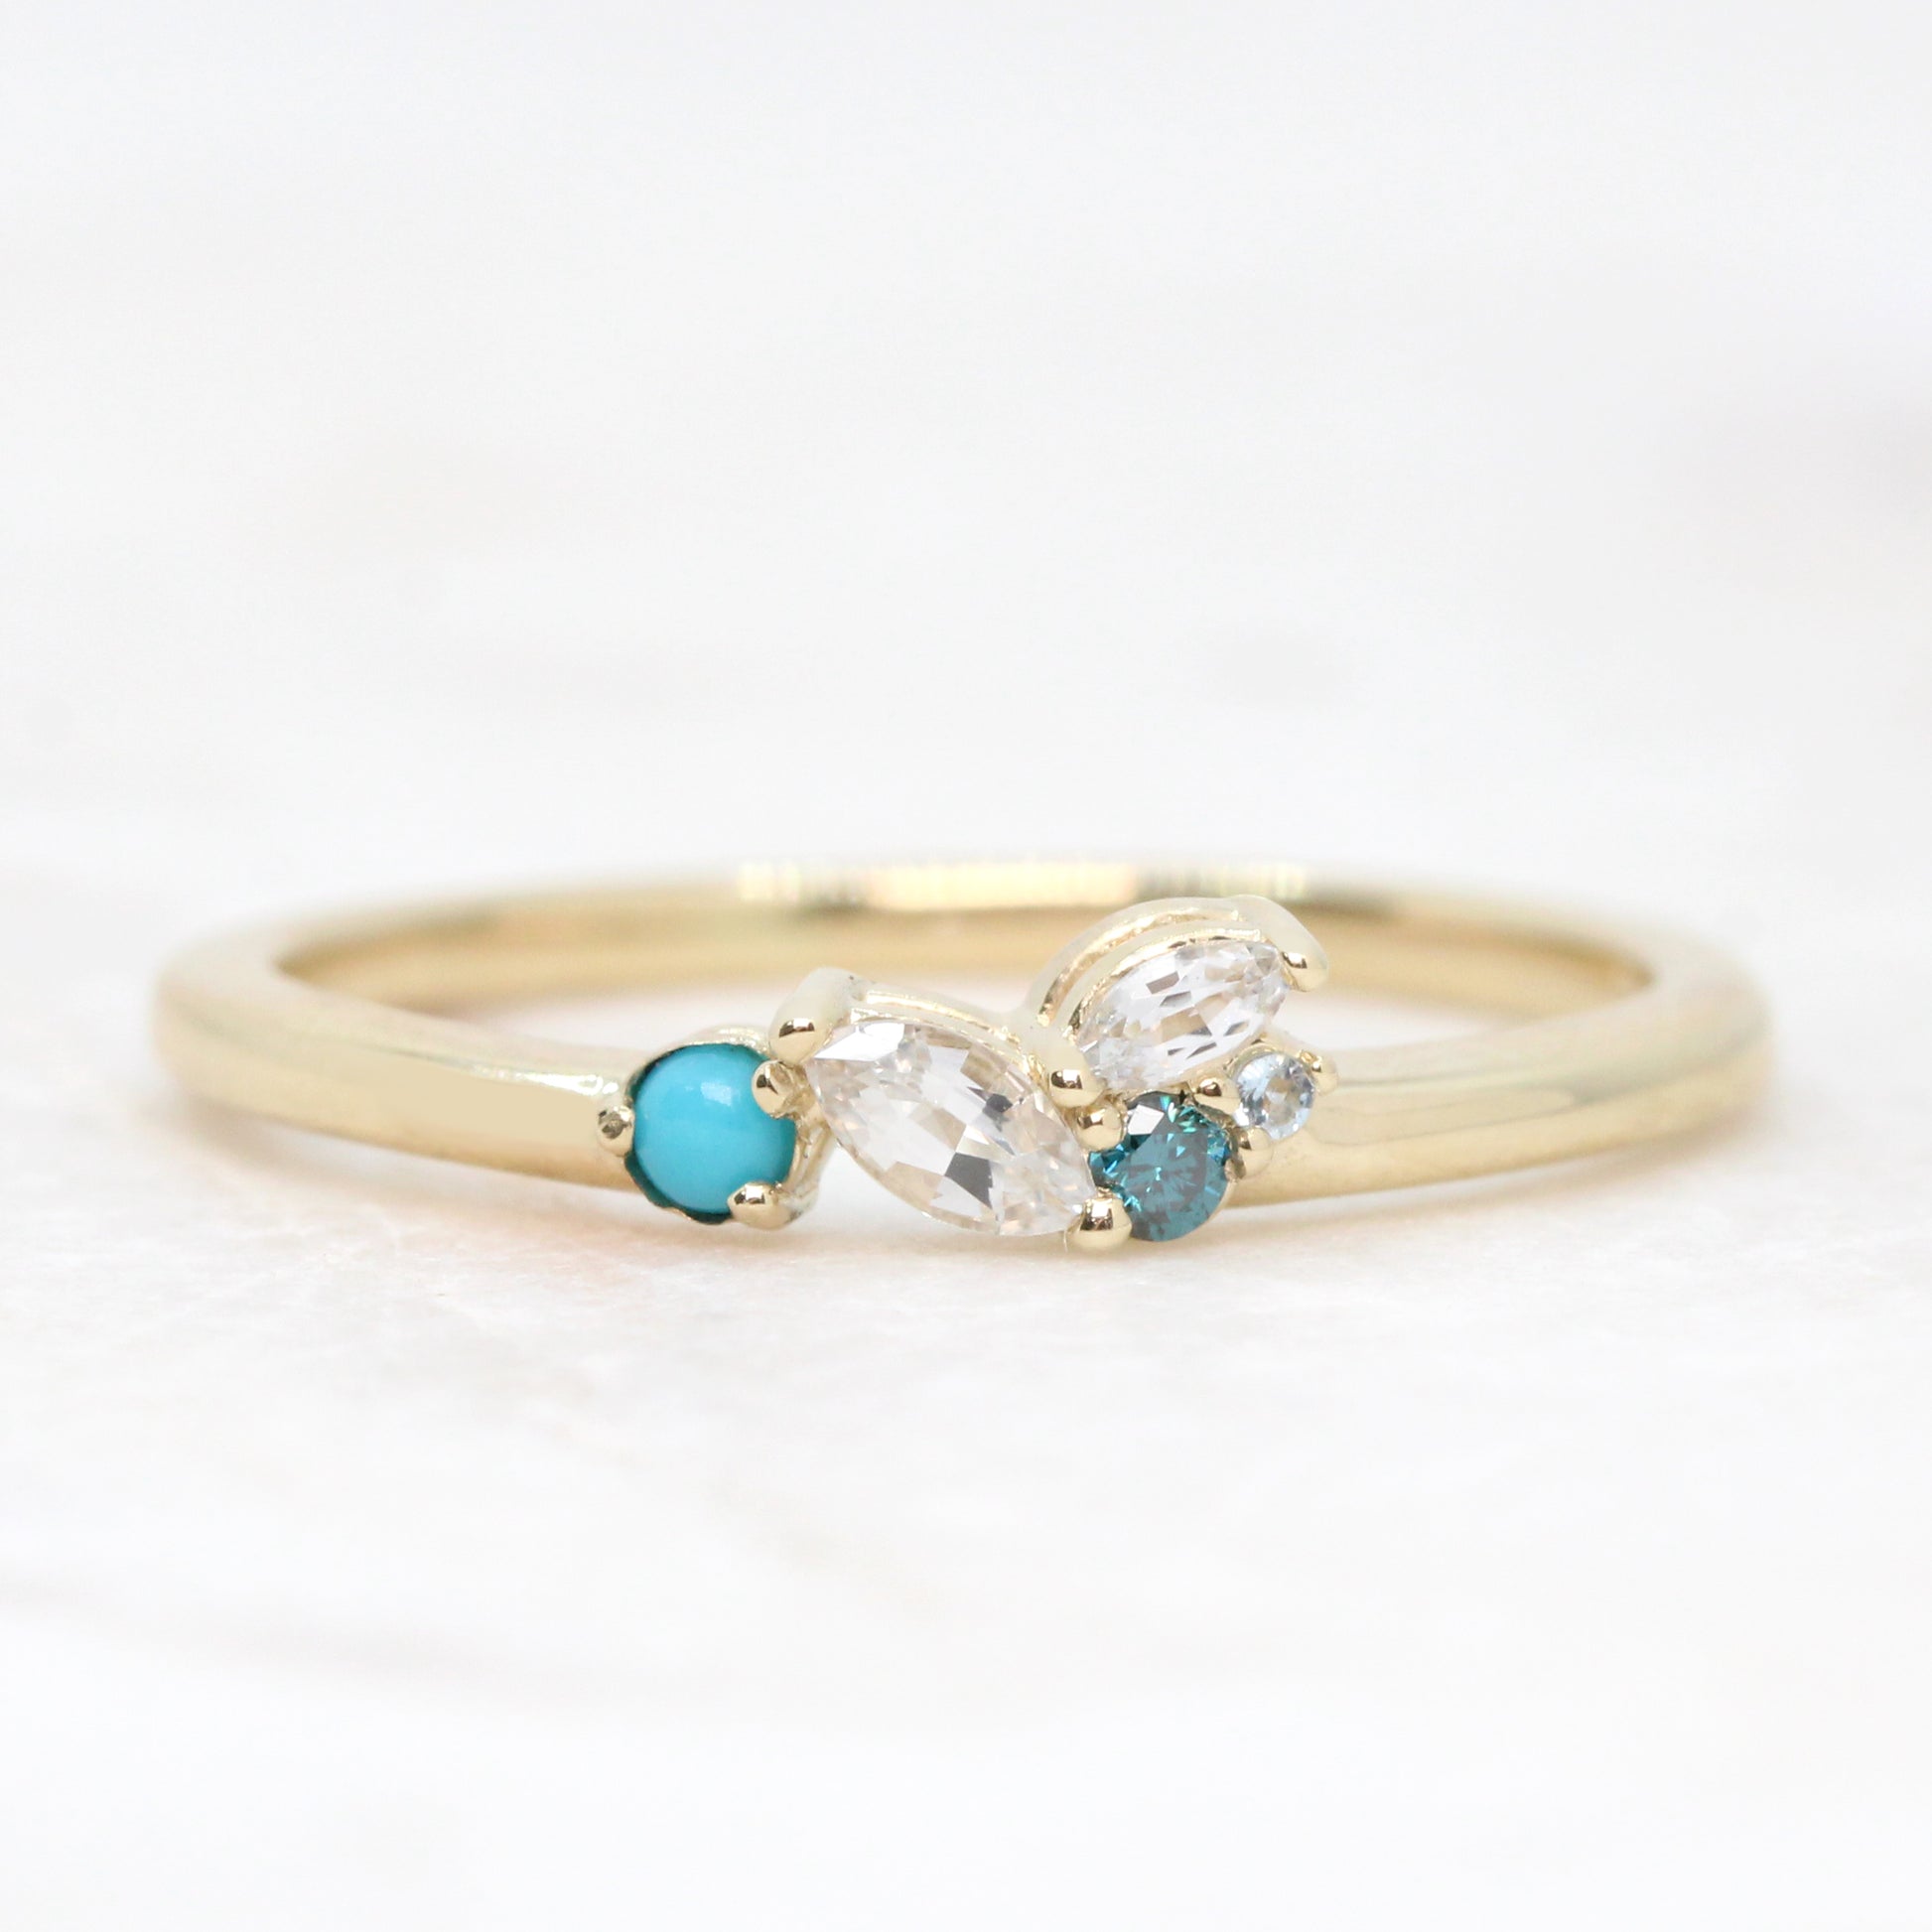 Anna Turquoise Aquamarine Sapphire Diamond Gemstone Cluster Stackable or Wedding Ring - Your choice of metal - Custom - Midwinter Co. Alternative Bridal Rings and Modern Fine Jewelry